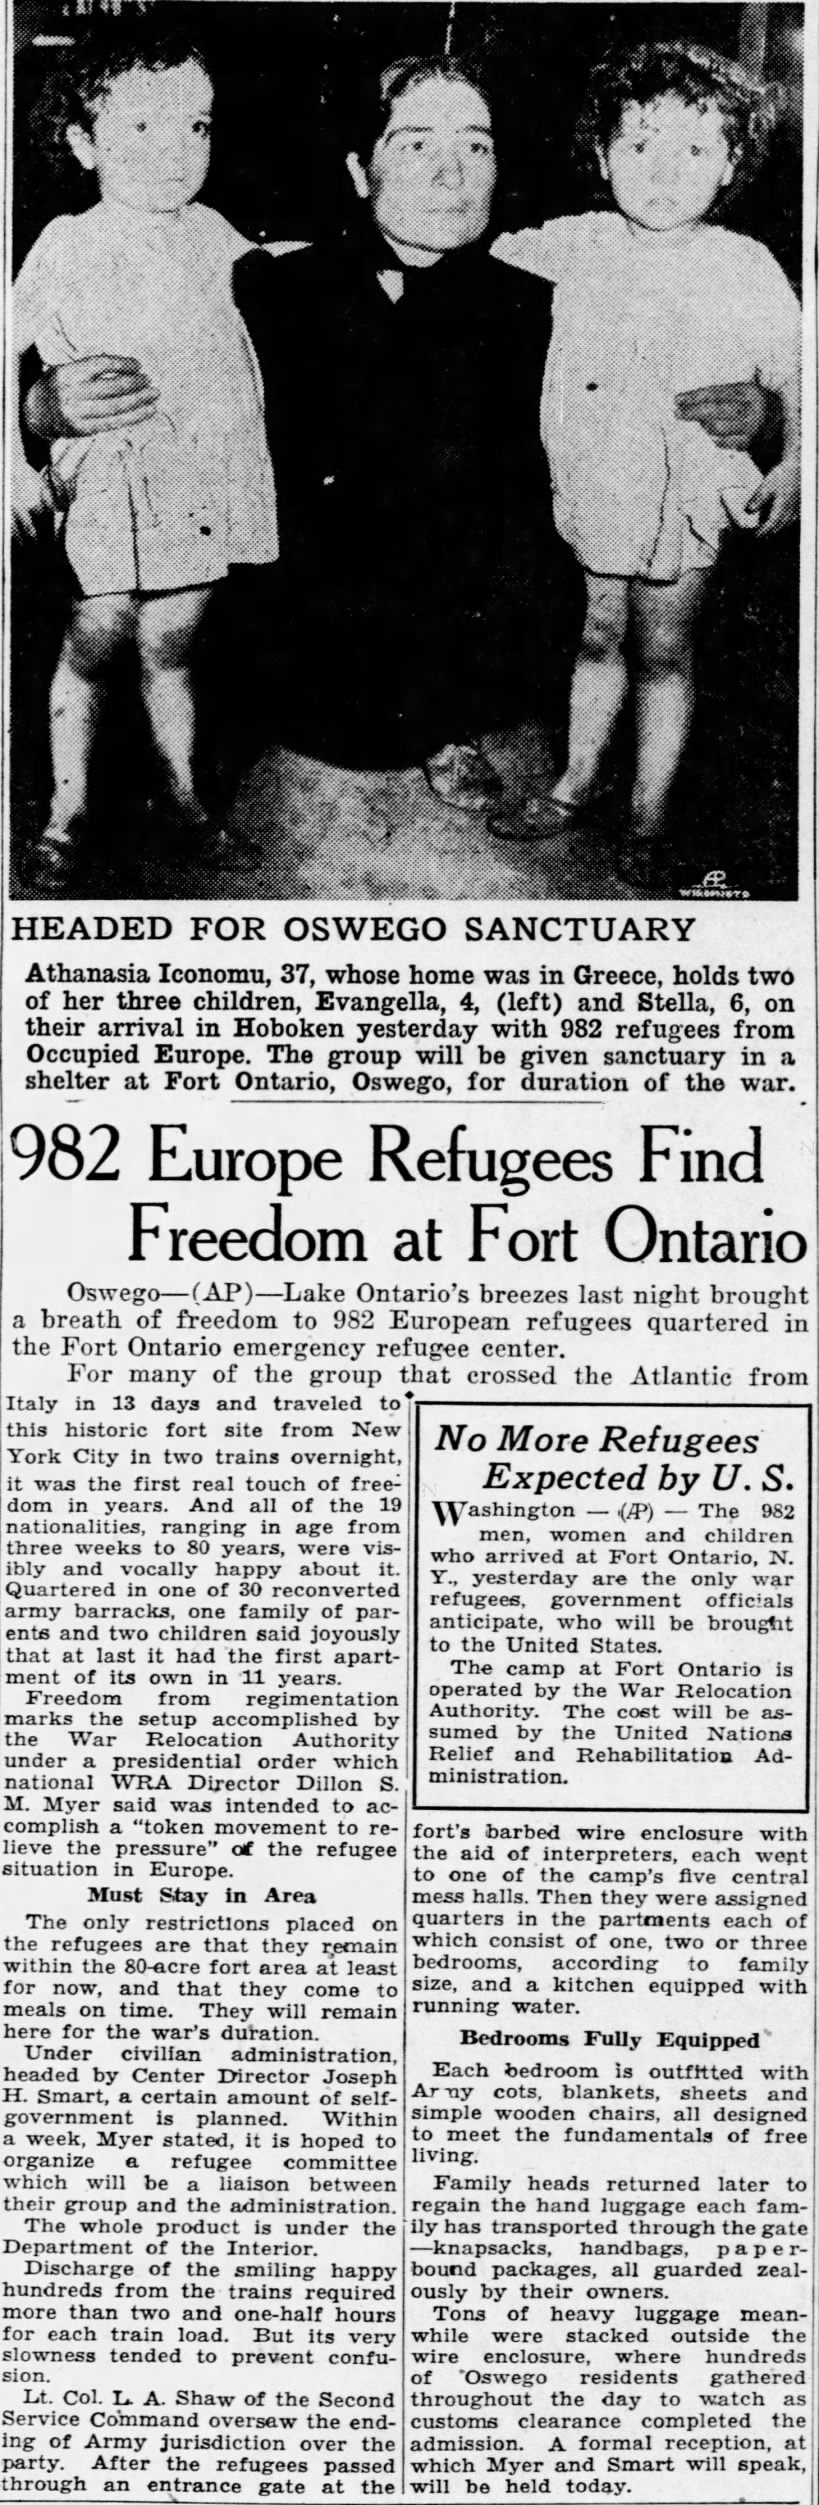 982 Europe Refugees Find Freedom at Fort Ontario (8/6/44)